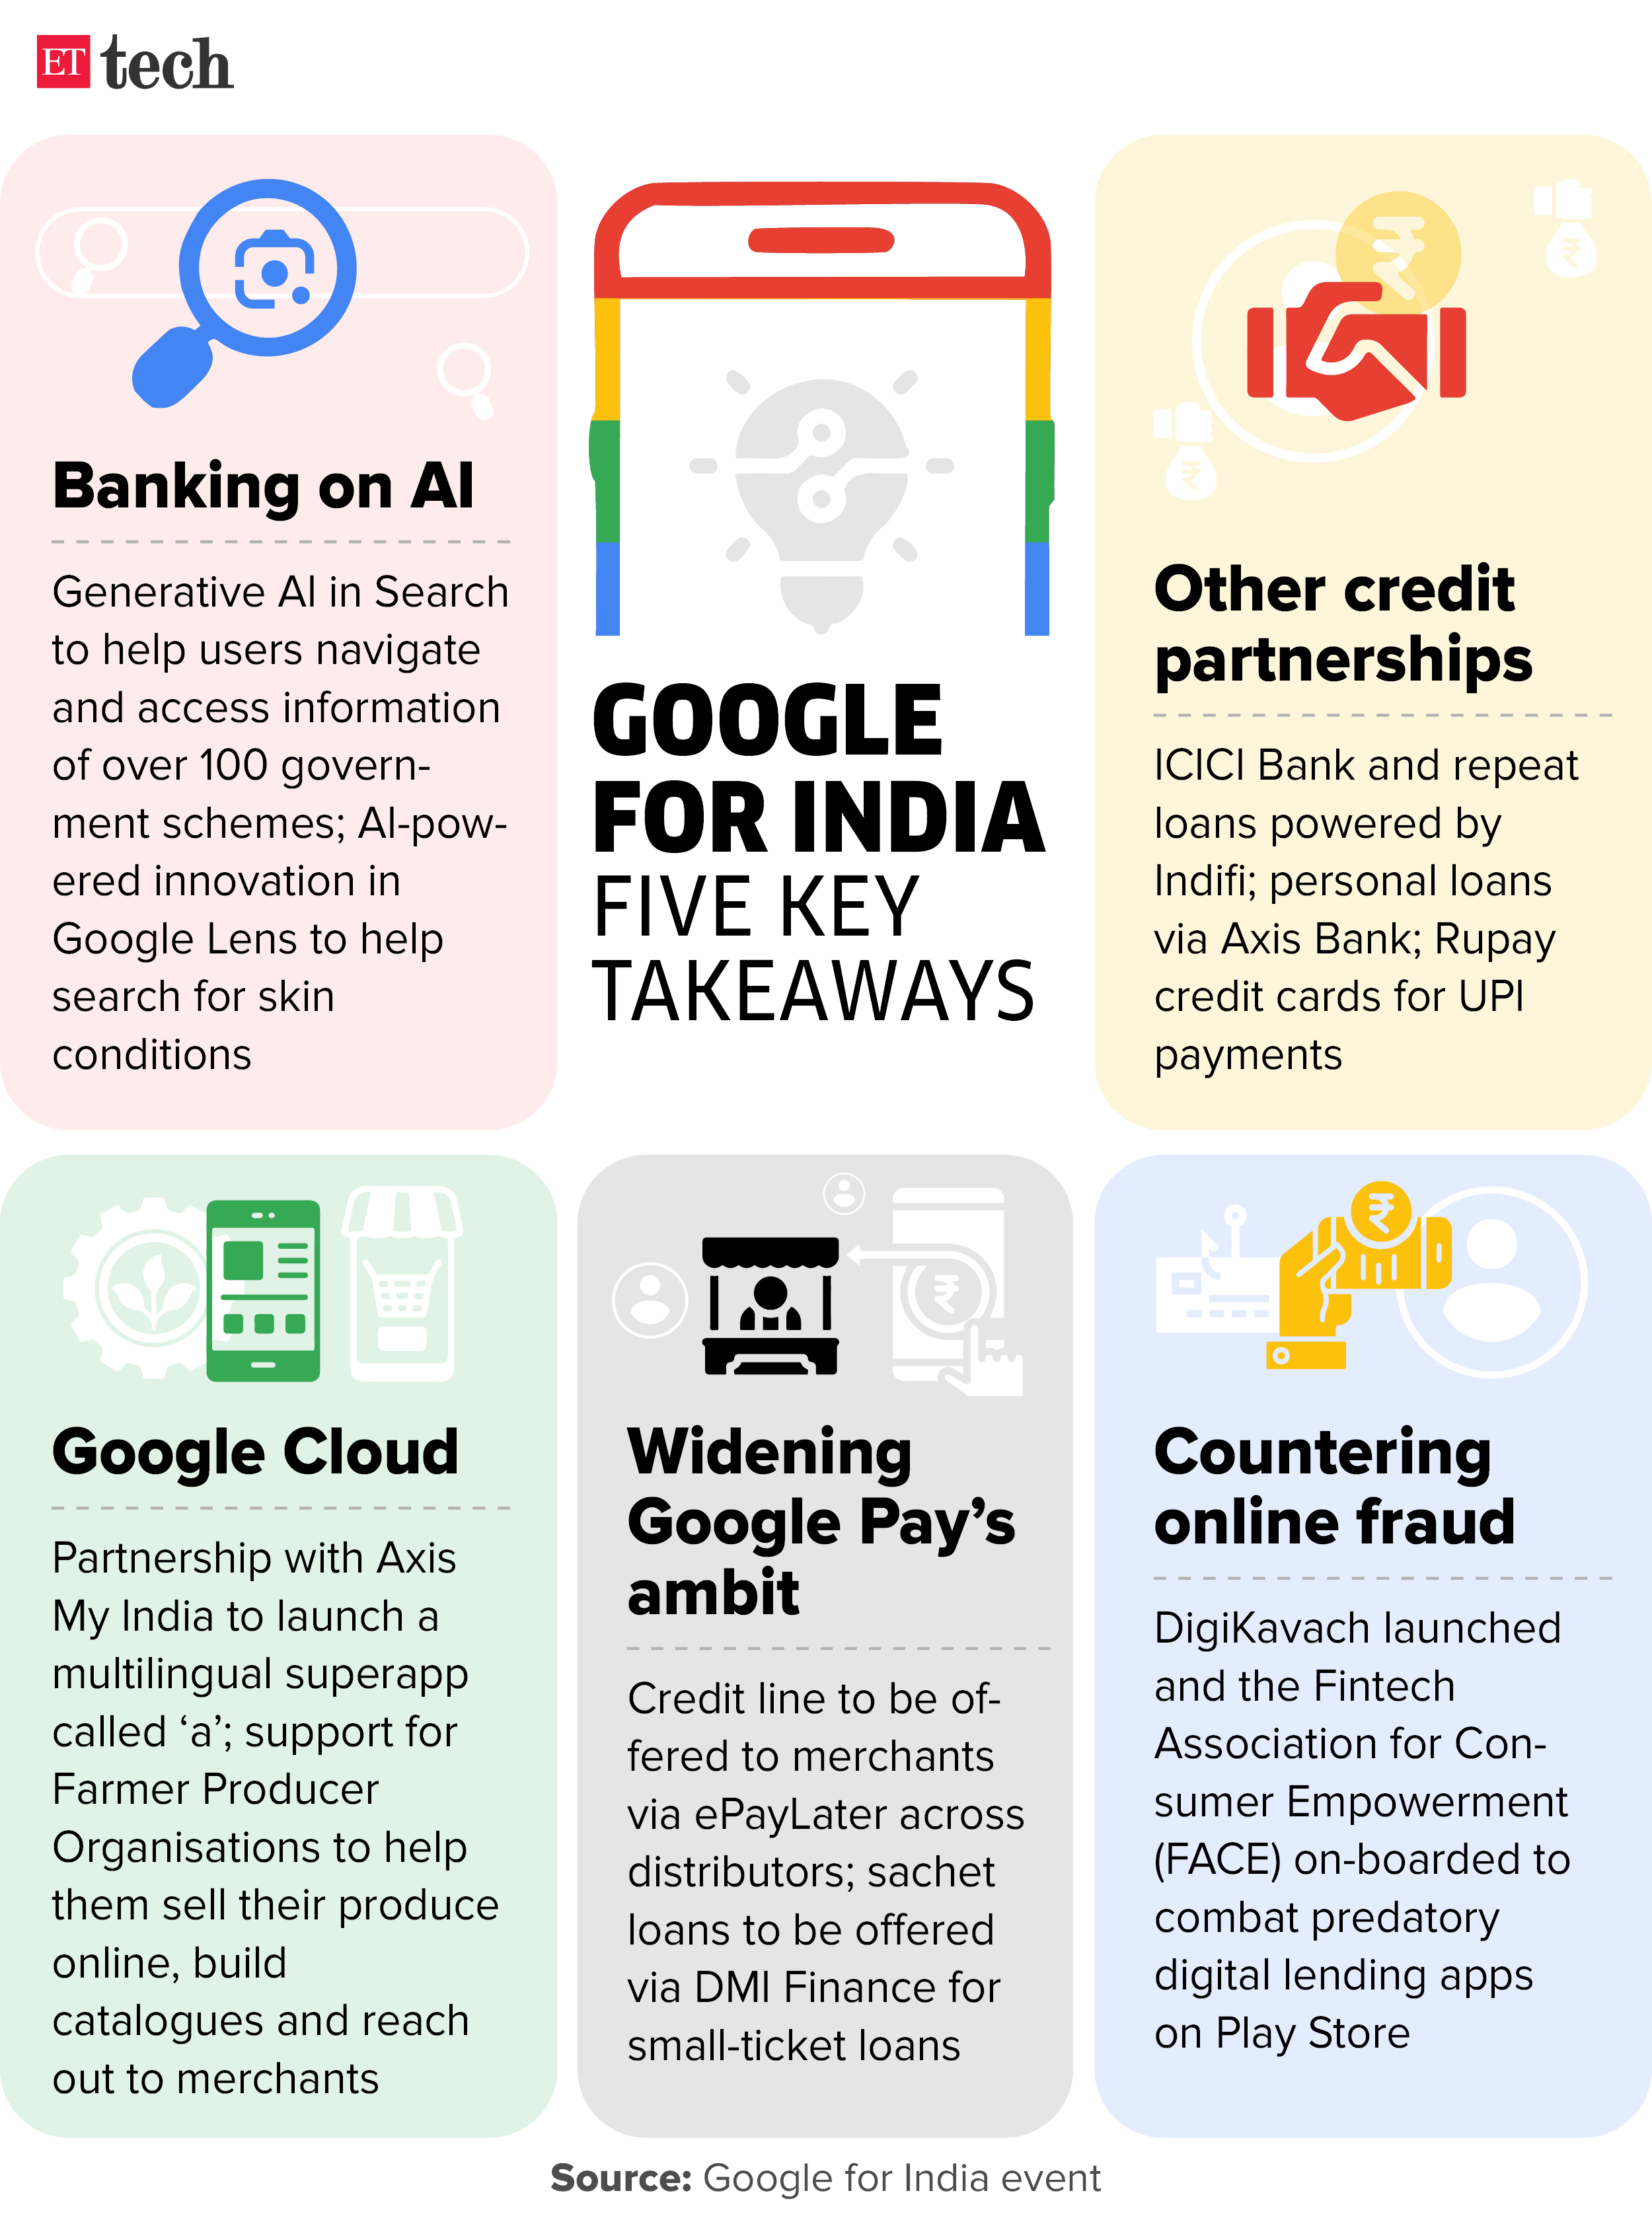 Google for India Five key takeaways_Graphic_ETTECH